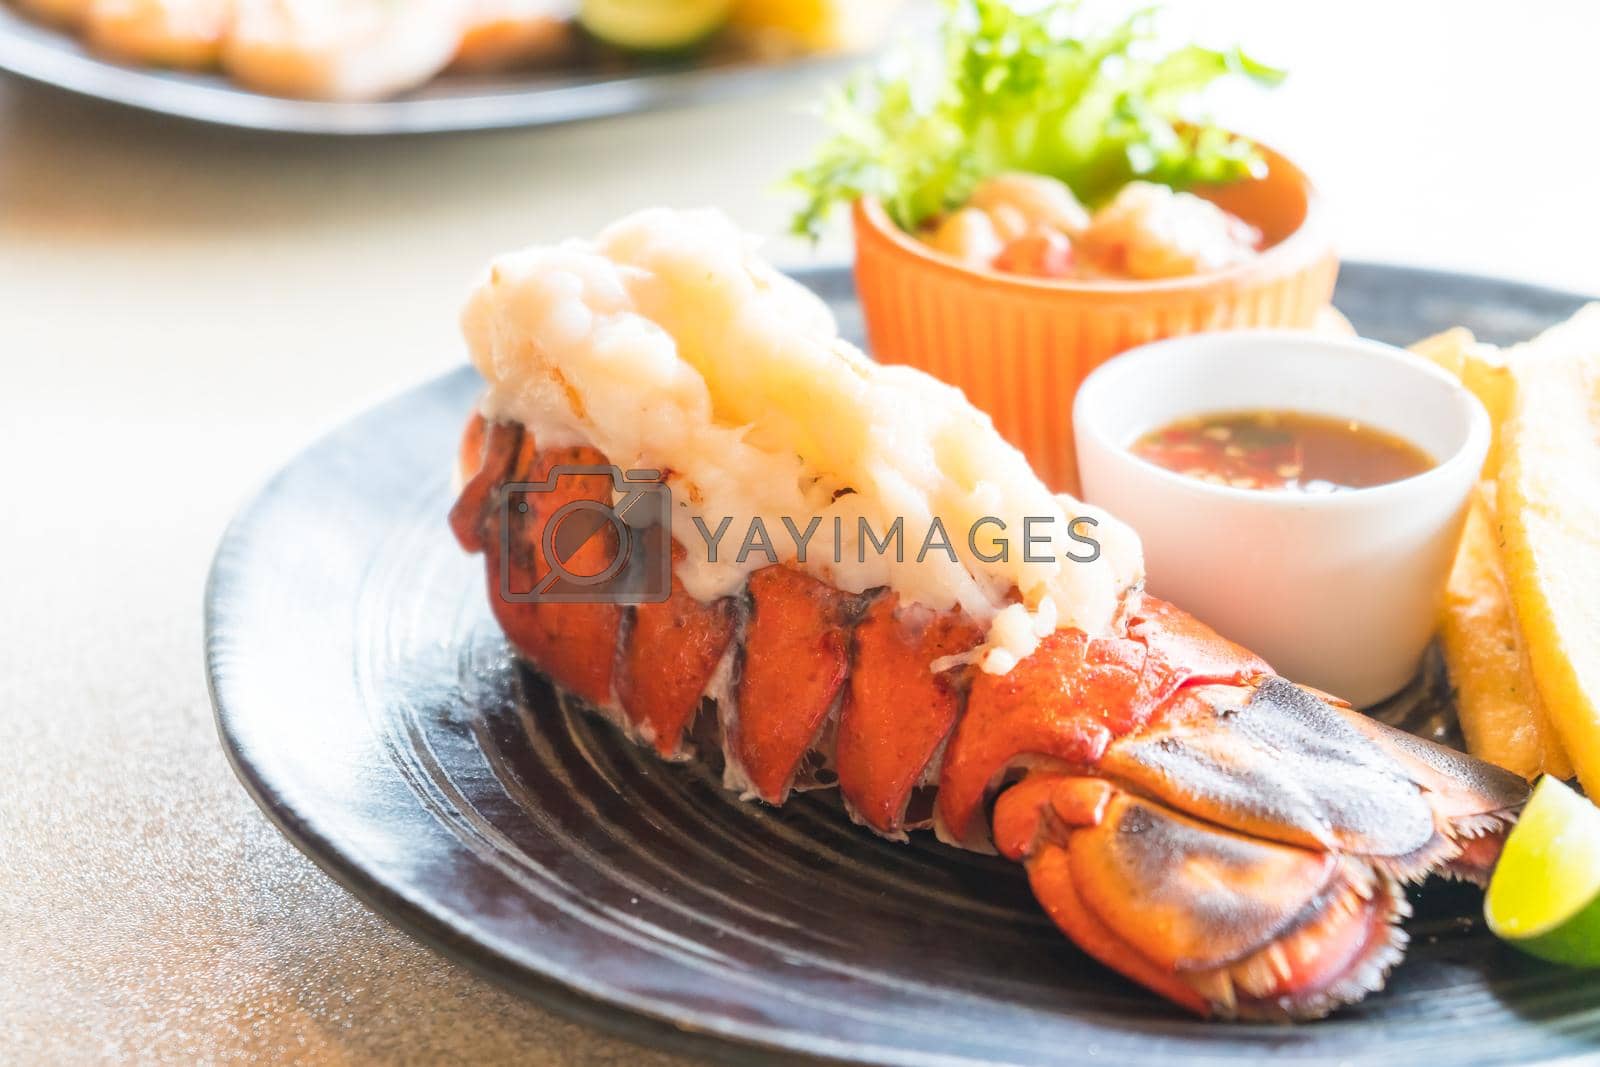 Royalty free image of Lobster steak by YayImages